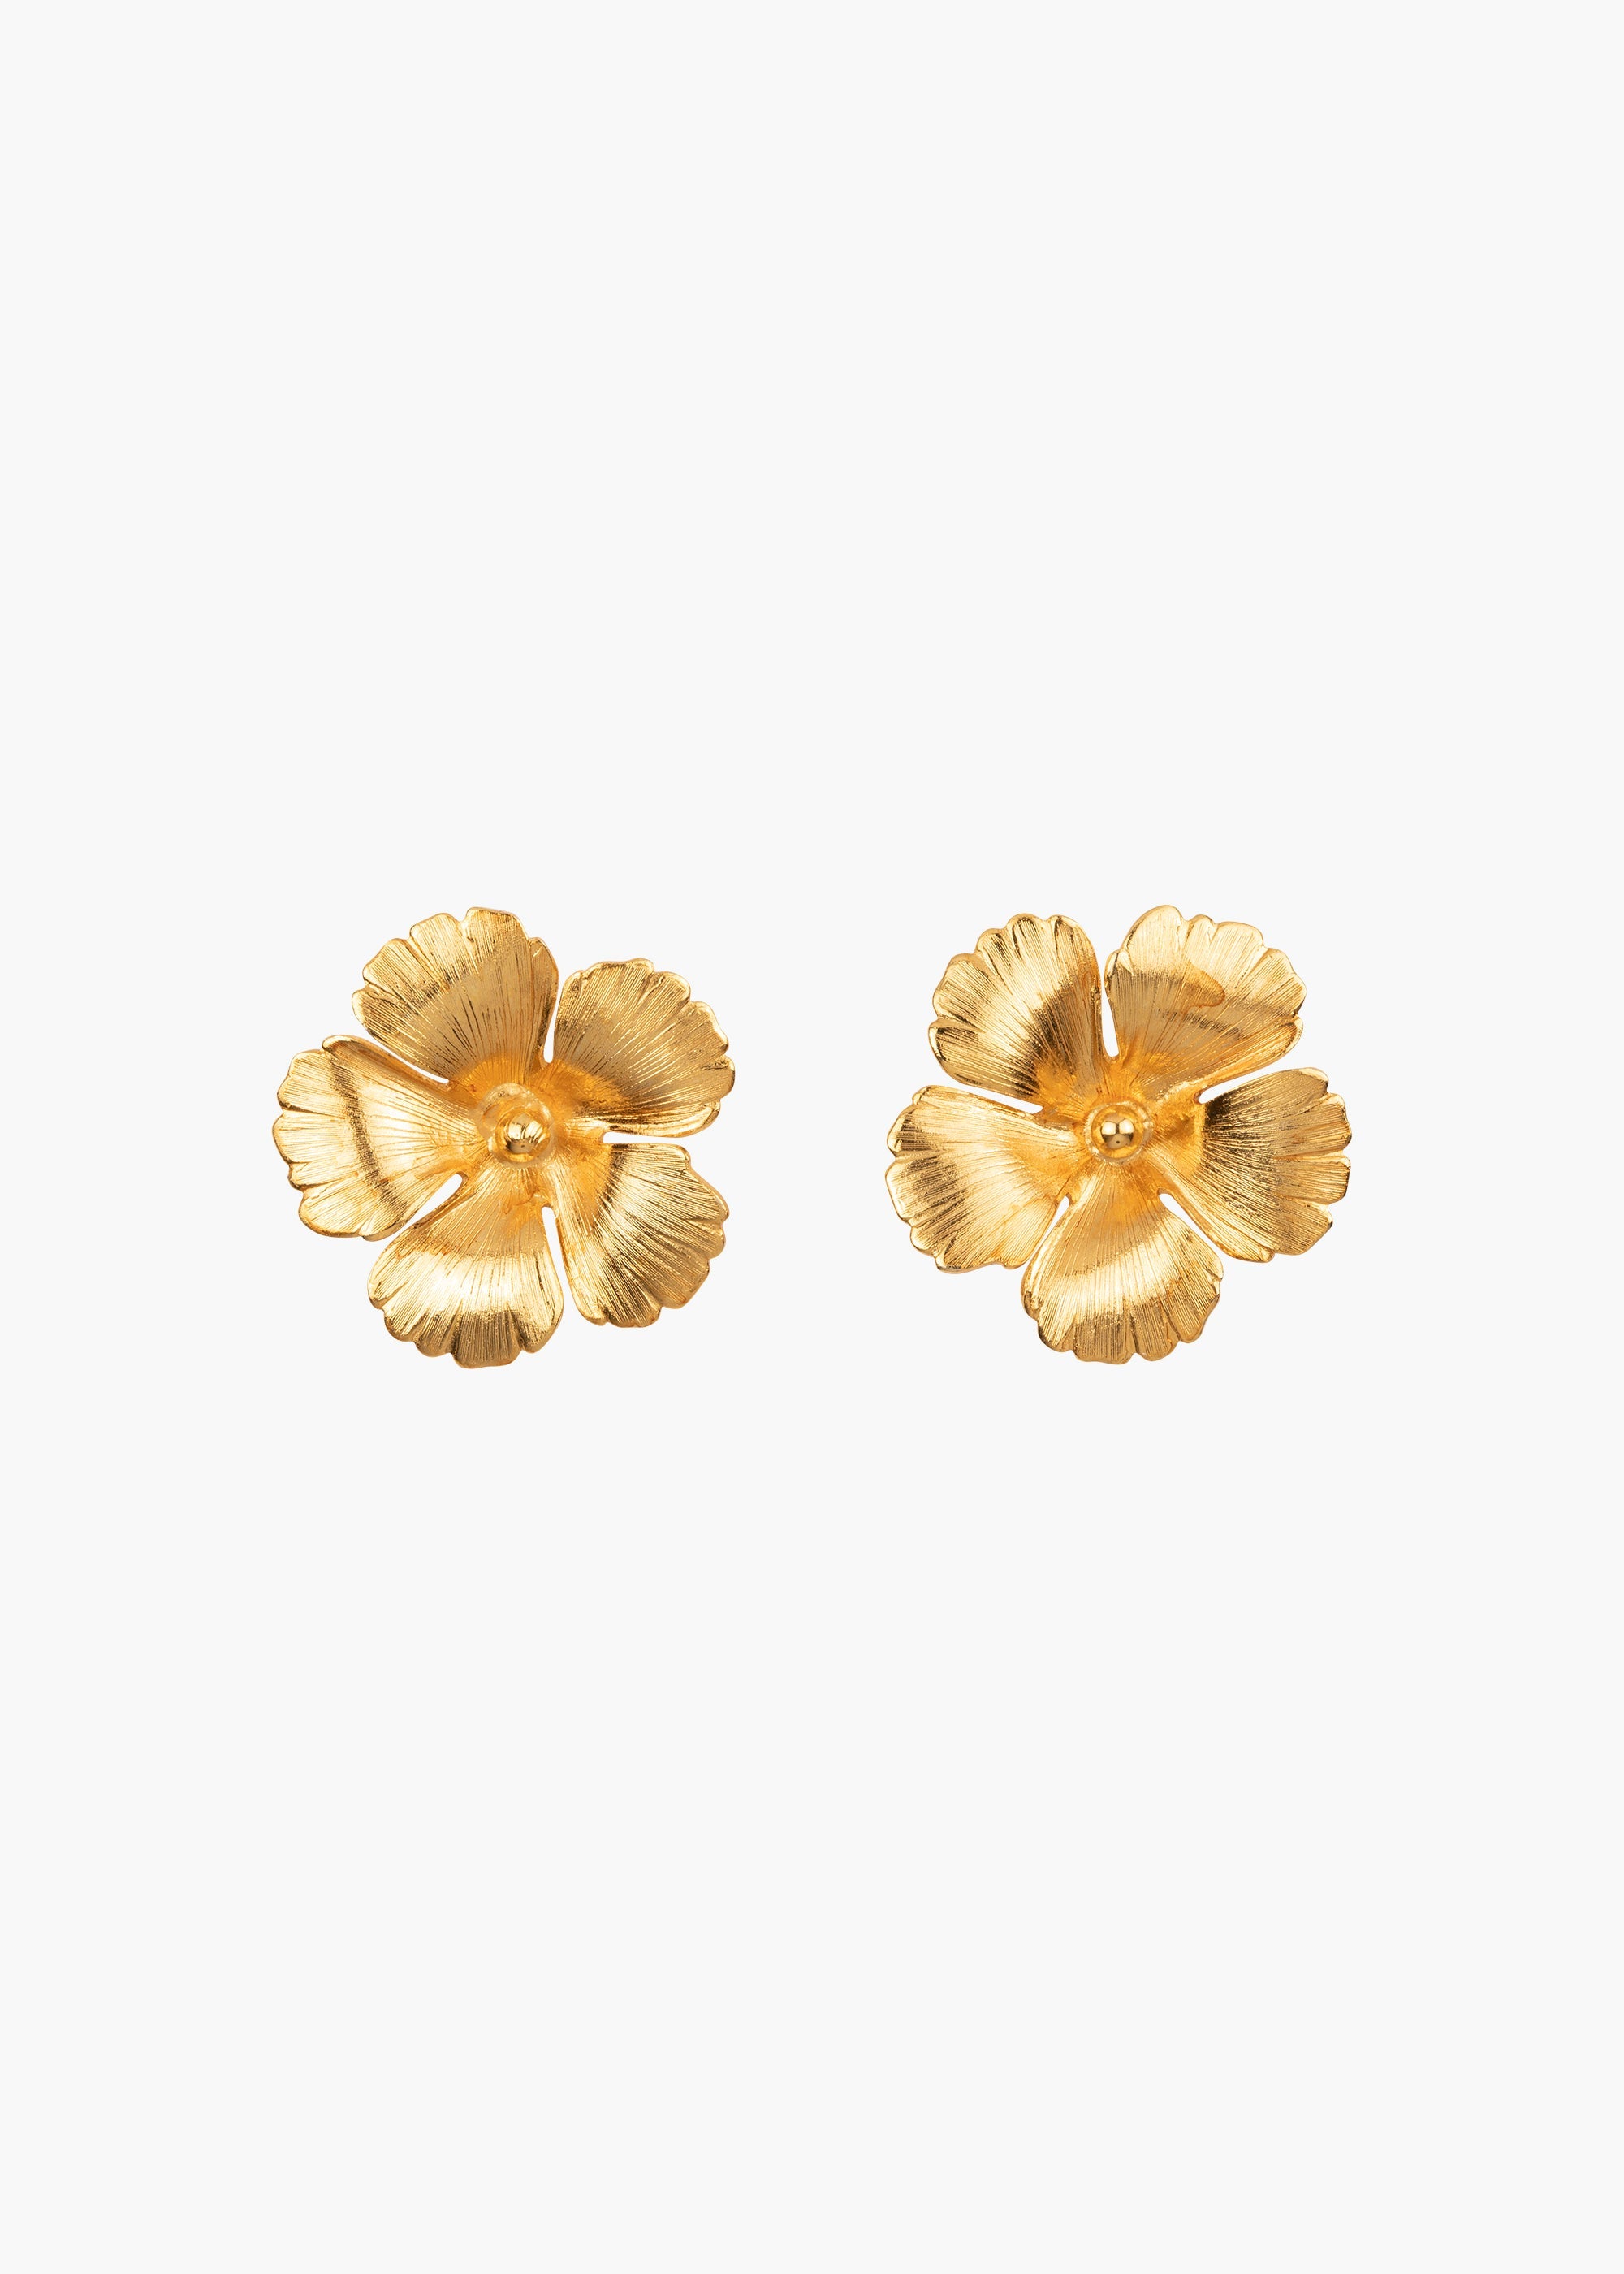 Victorian Foil-Backed Citrine Pendeloque Day/Night Earrings 22k c. 185 –  Bavier Brook Antique Jewelry